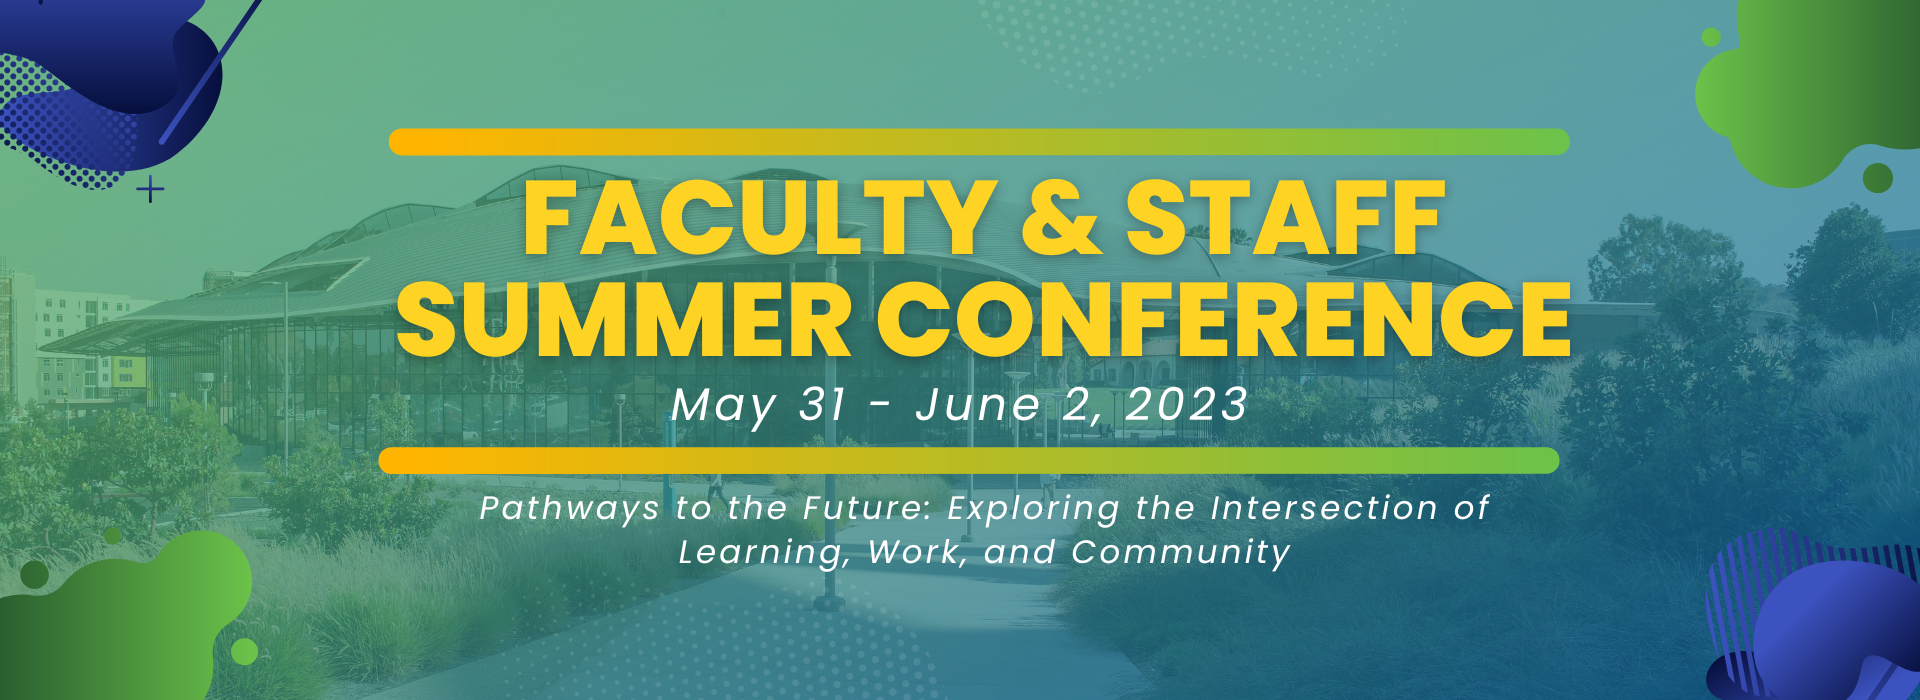 Faculty and Staff Summer Conference 2023